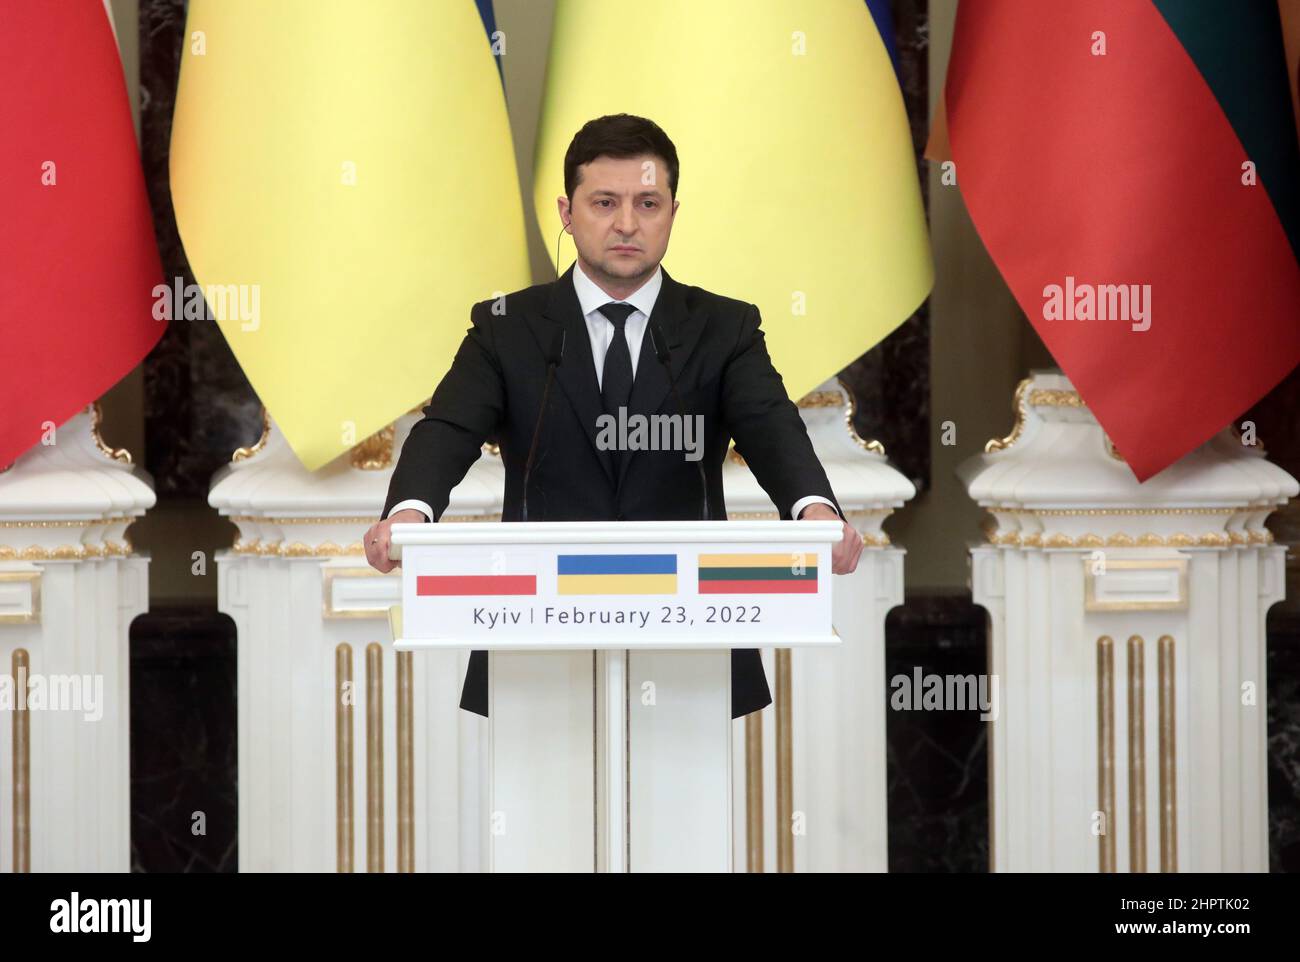 Non Exclusive: KYIV, UKRAINE - FEBRUARY 23, 2022 - President of Ukraine Volodymyr Zelenskyy is pictured during his meeting with President of the Repub Stock Photo